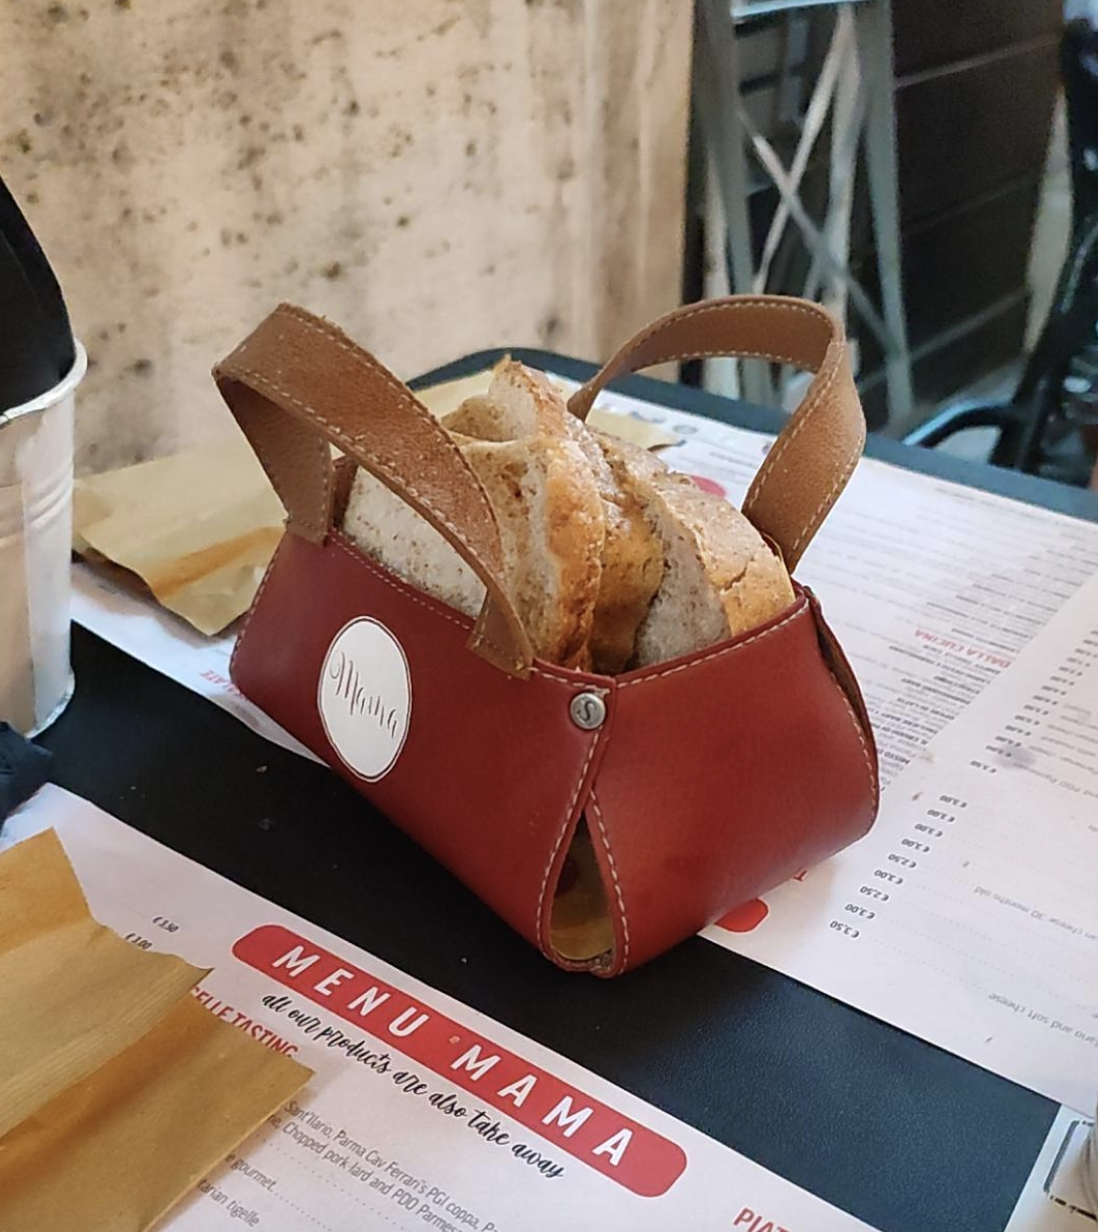 A bag with bread inside